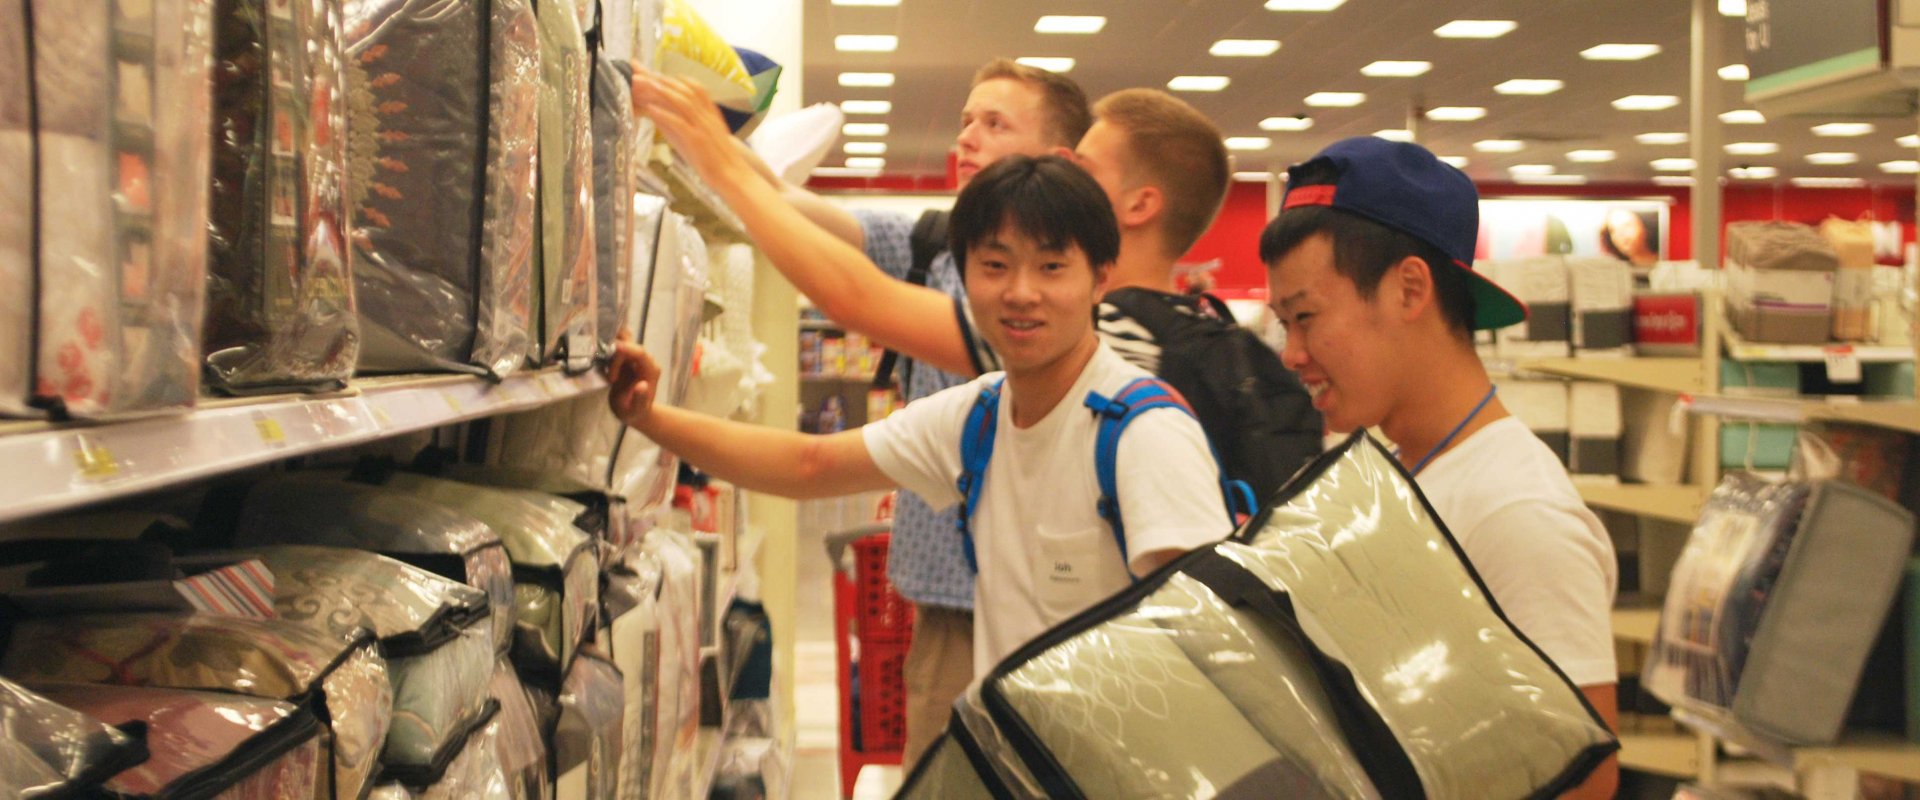 International students making a trip to buy sheets.